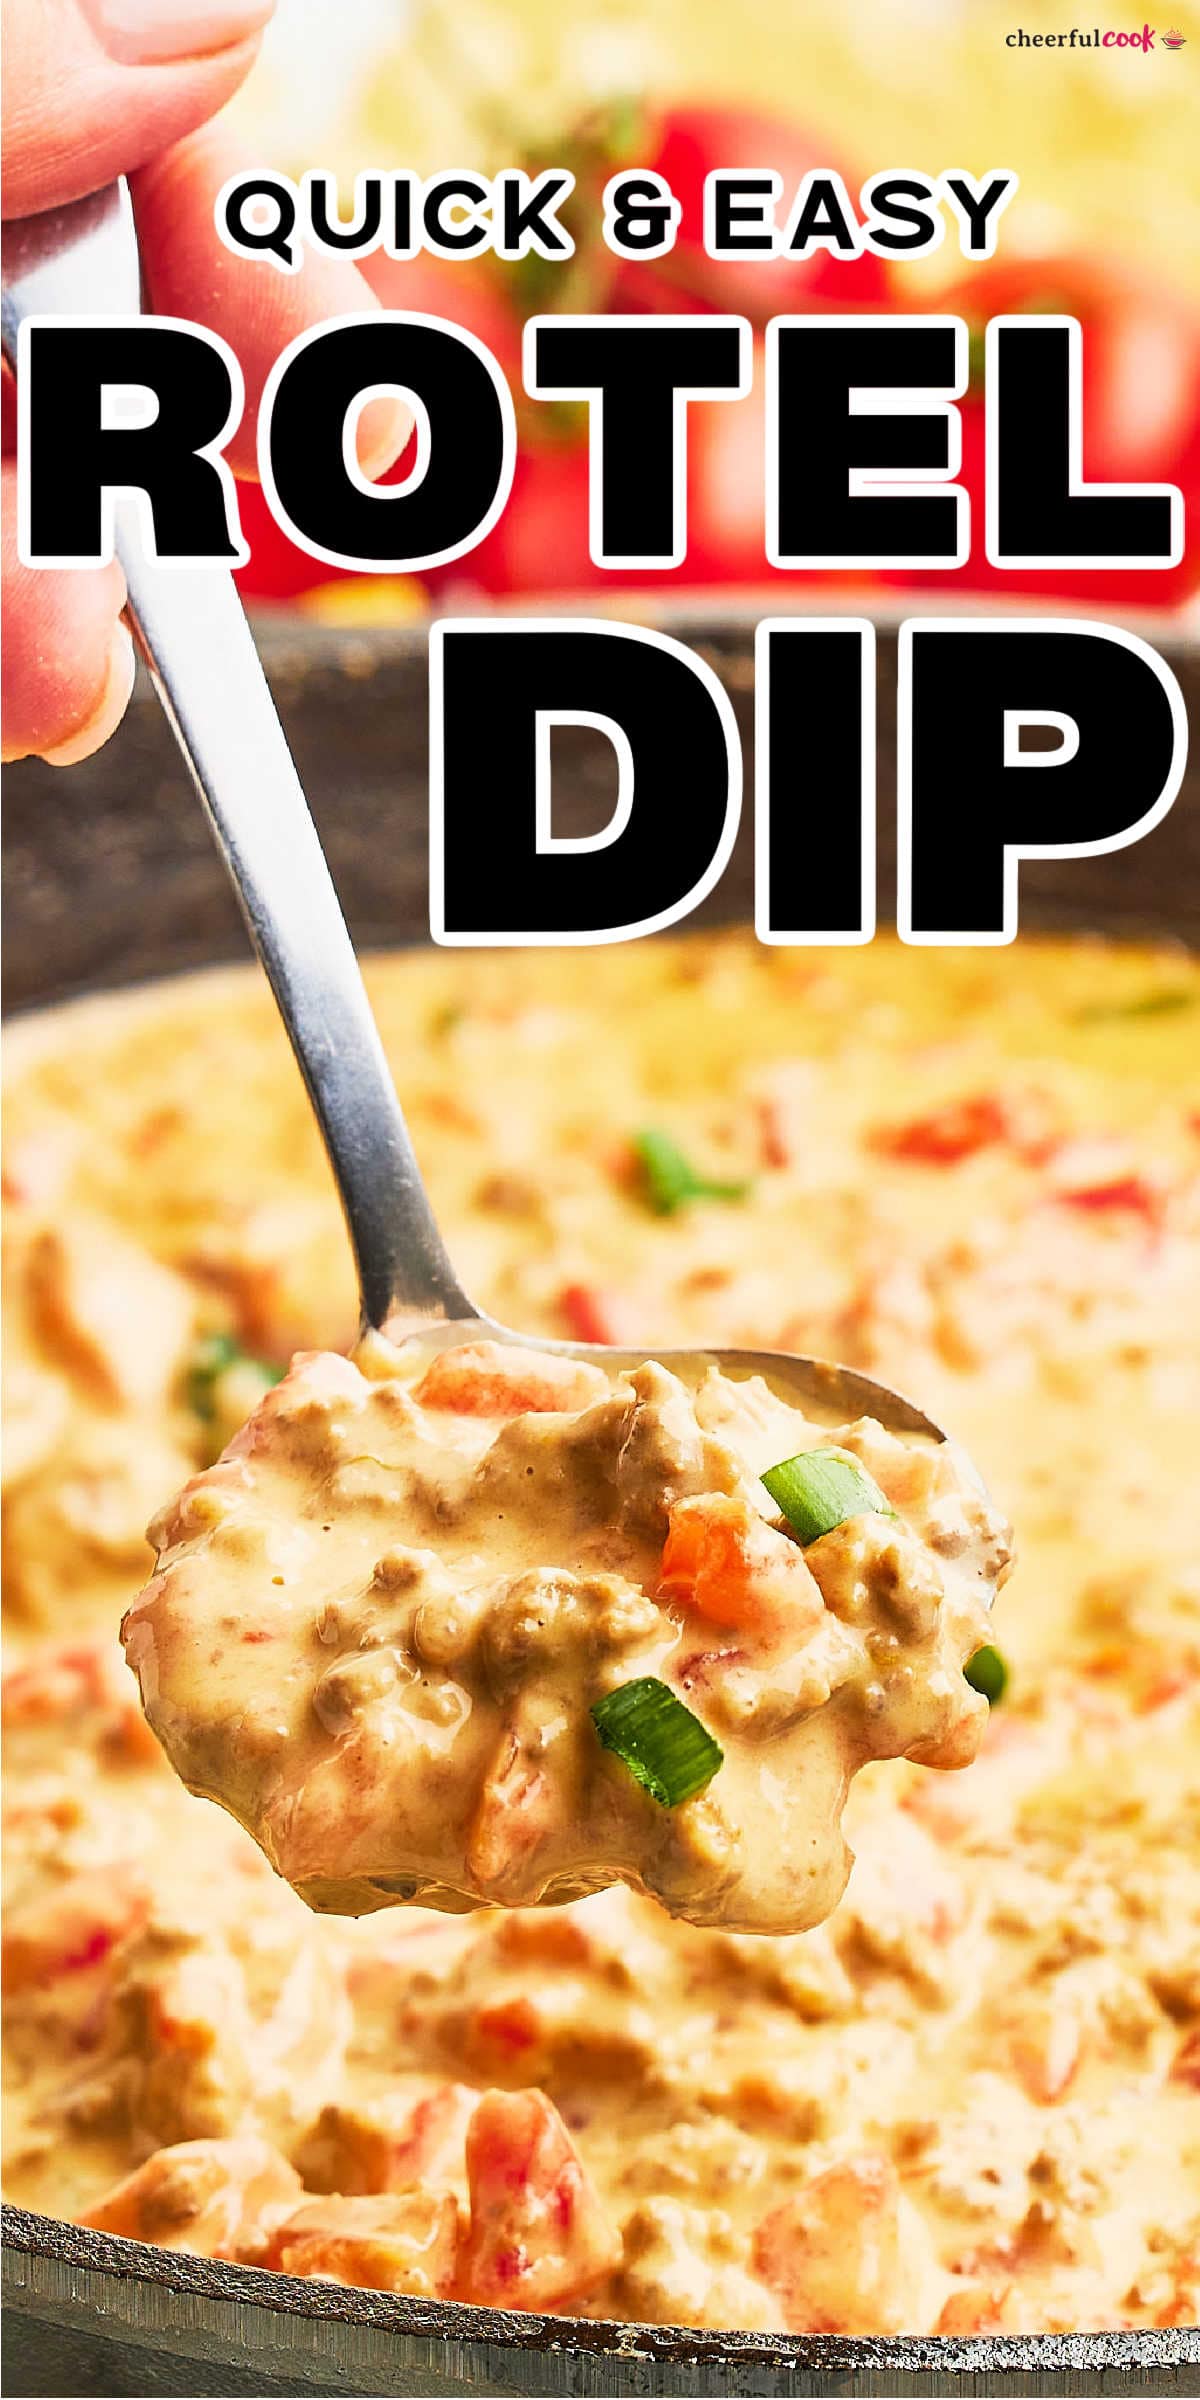 This classic Rotel Dip is a crowd-pleaser at any party! Made with just a few simple ingredients, it's easy to prepare and packed with flavor. Perfect for dipping with tortilla chips or crackers, it's sure to be a hit with guests. Try it today! #cheerfulcook #RotelDip #PartyFood #EasyRecipe #dip via @cheerfulcook